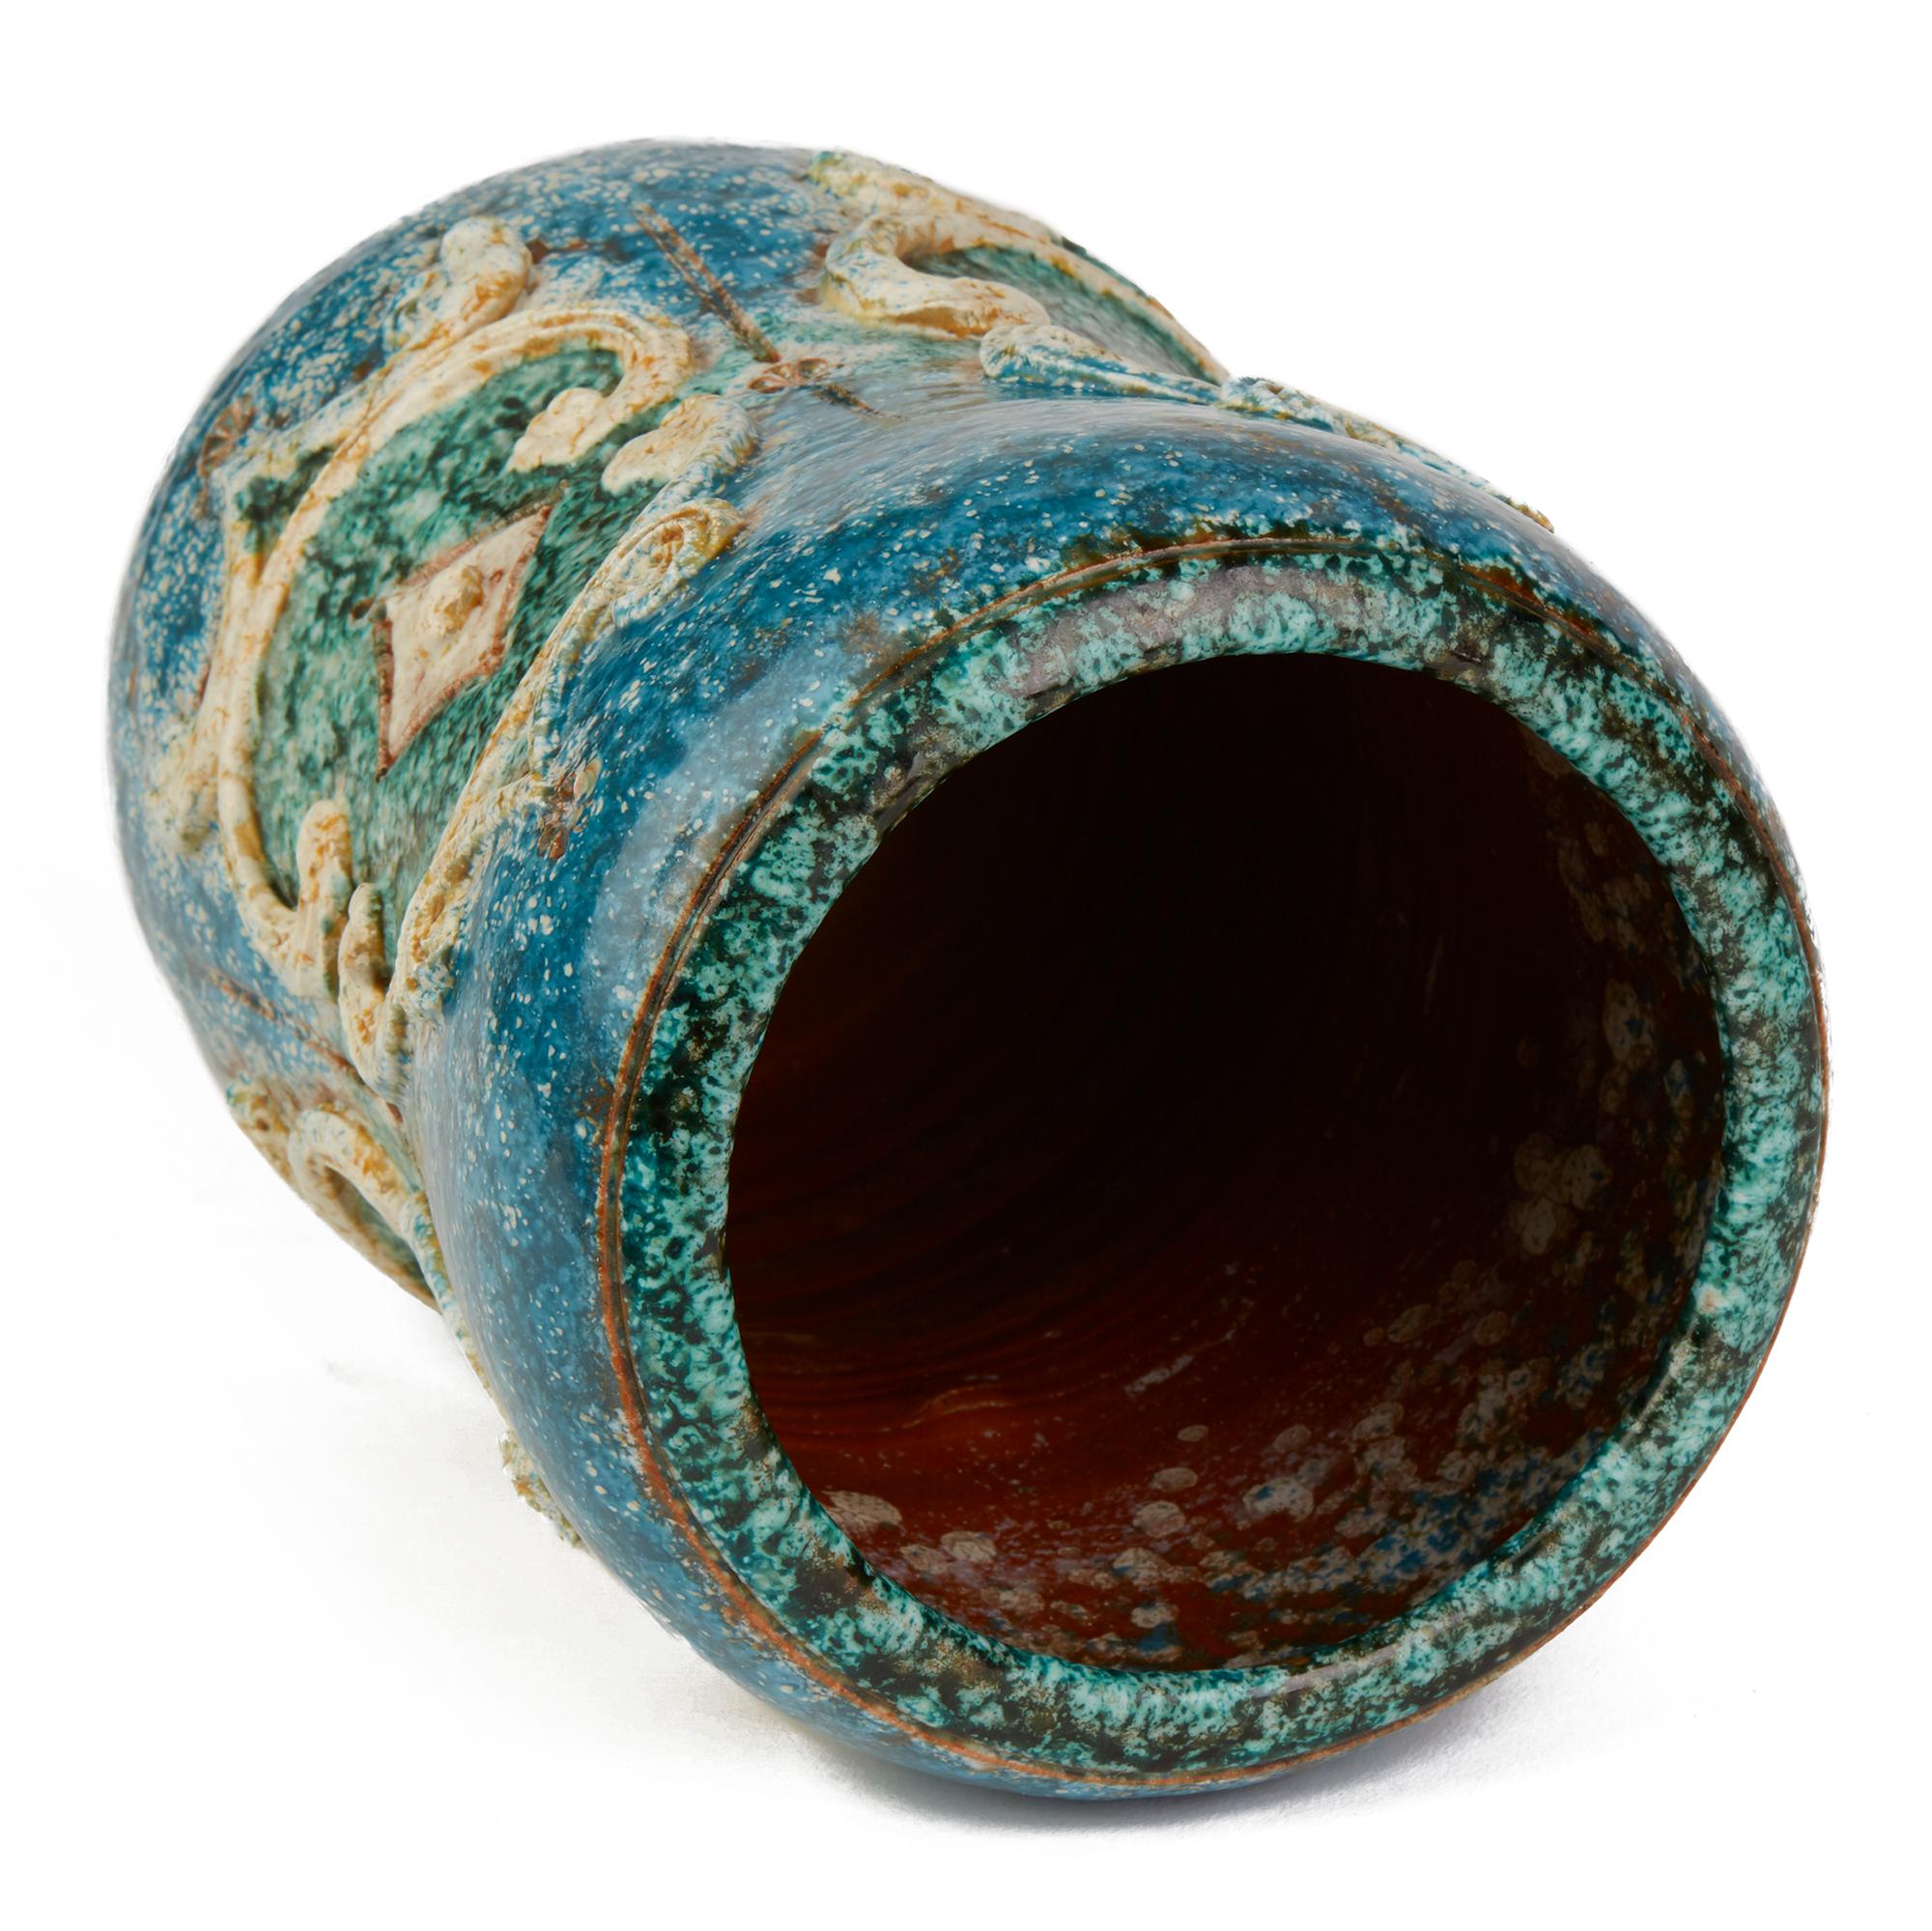 A very unusual and stylish vintage Italian art pottery vase attributed to Alvino Bagni and probably made by Raymor. The waisted rounded bulbous vase is applied with raised designs with incised patterning and decorated in sea colored glazes with